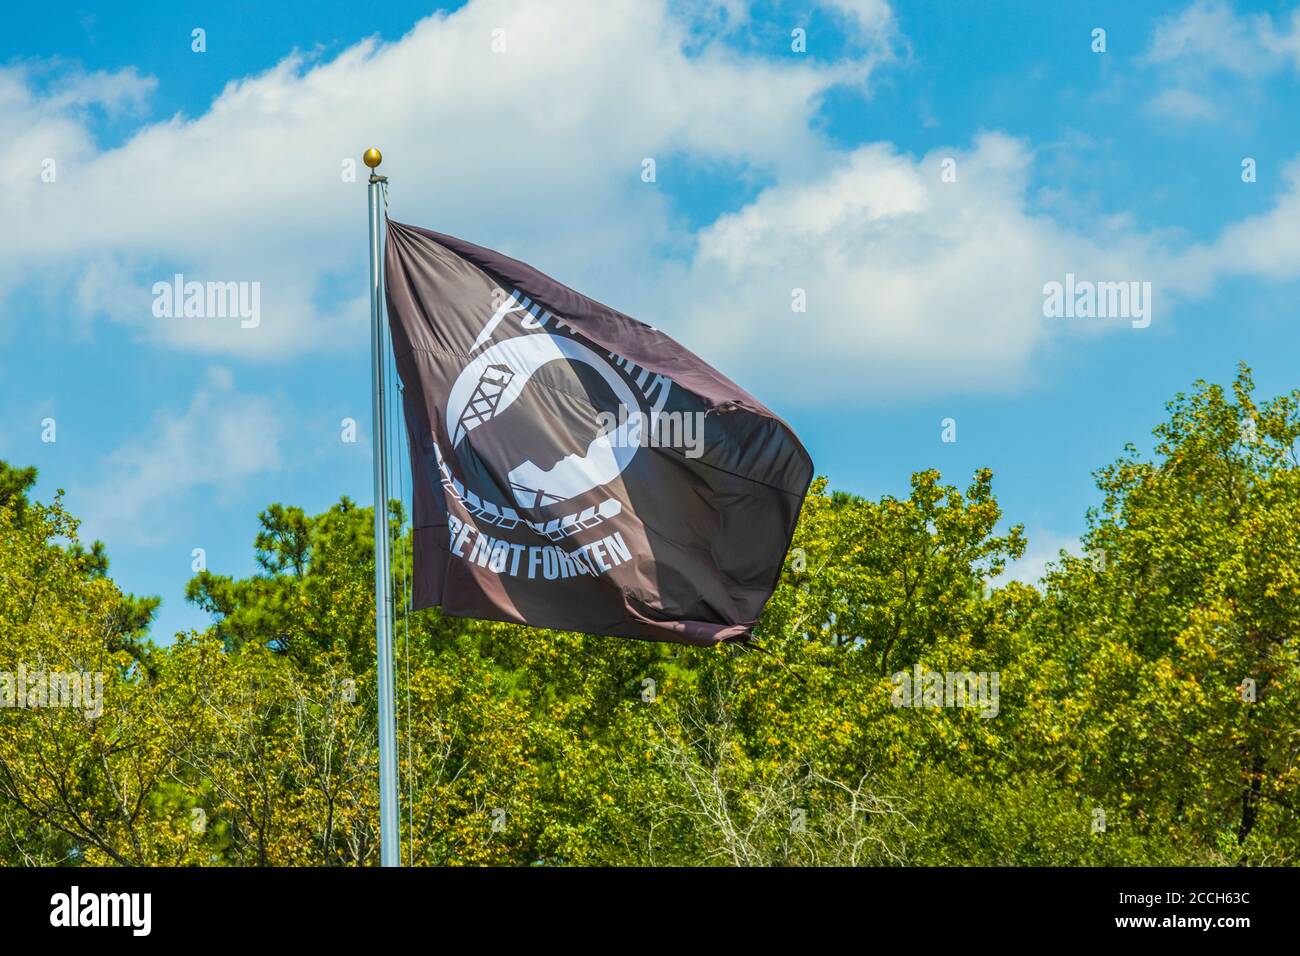 POW-MIA (Missing in Action) United States Military Flag at Conroe Veterans Memorial Park in Conroe, Texas. Stock Photo